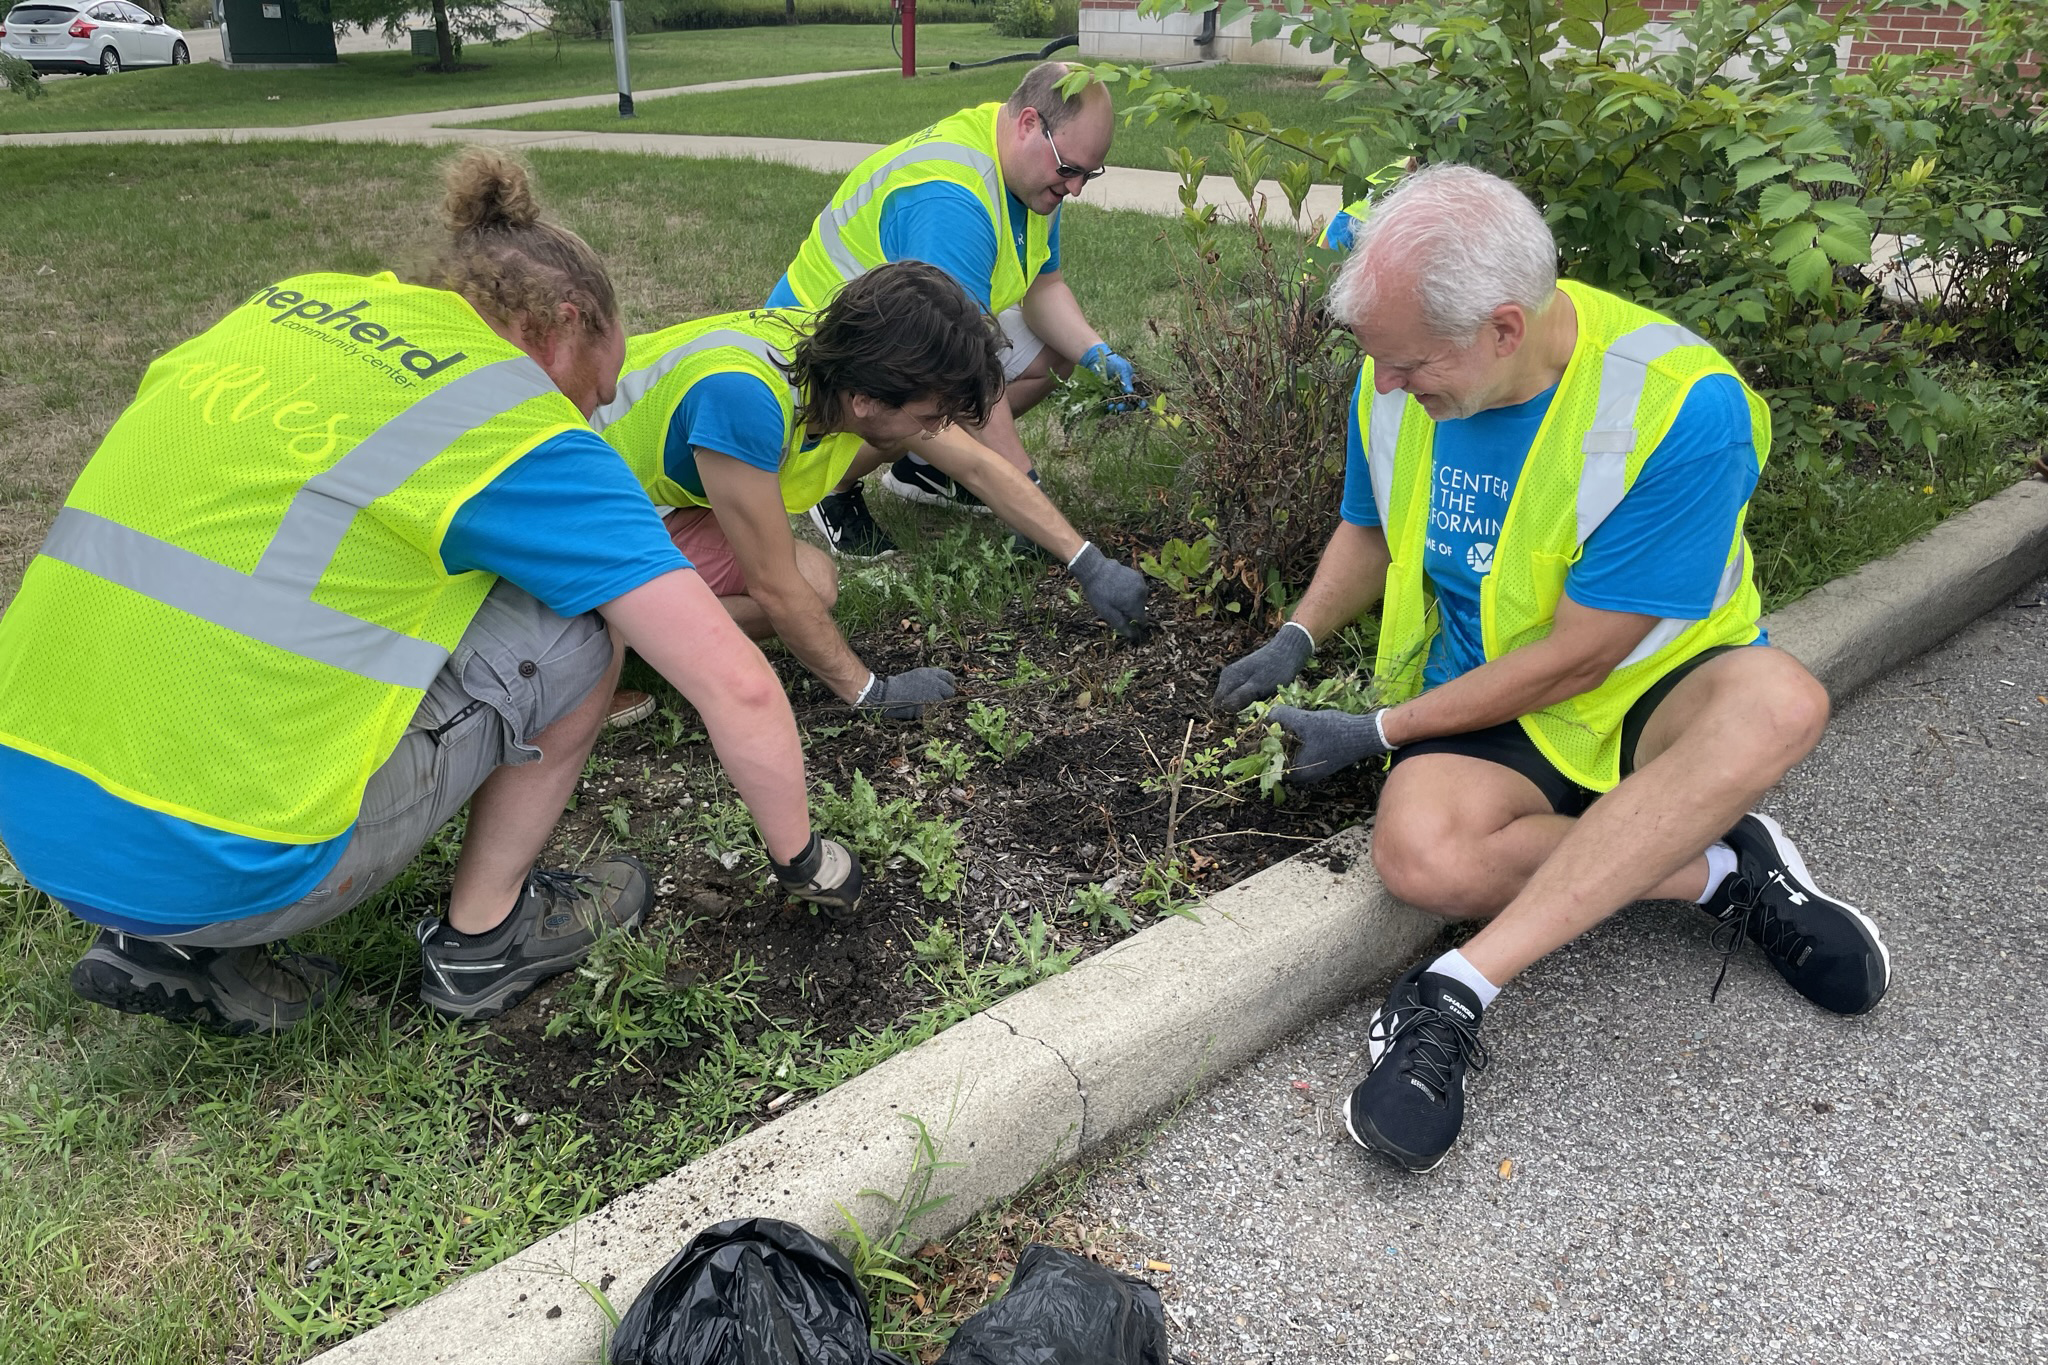 Four men wearing bright vests pull weeds near a parking lot.